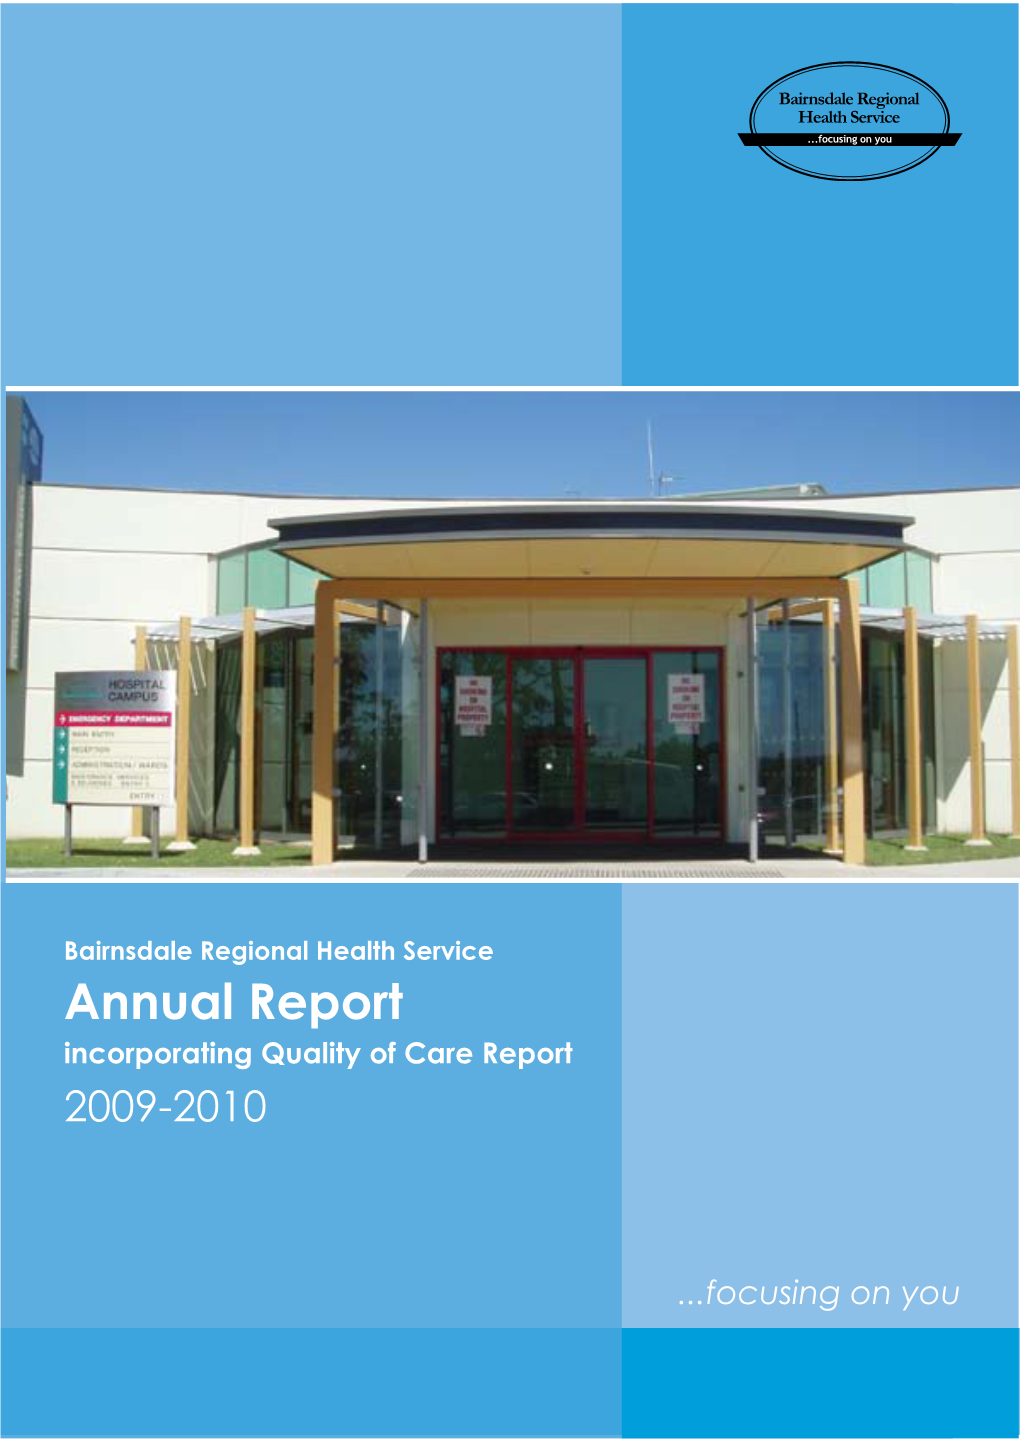 Annual Report Incorporating Quality of Care Report 2009-2010